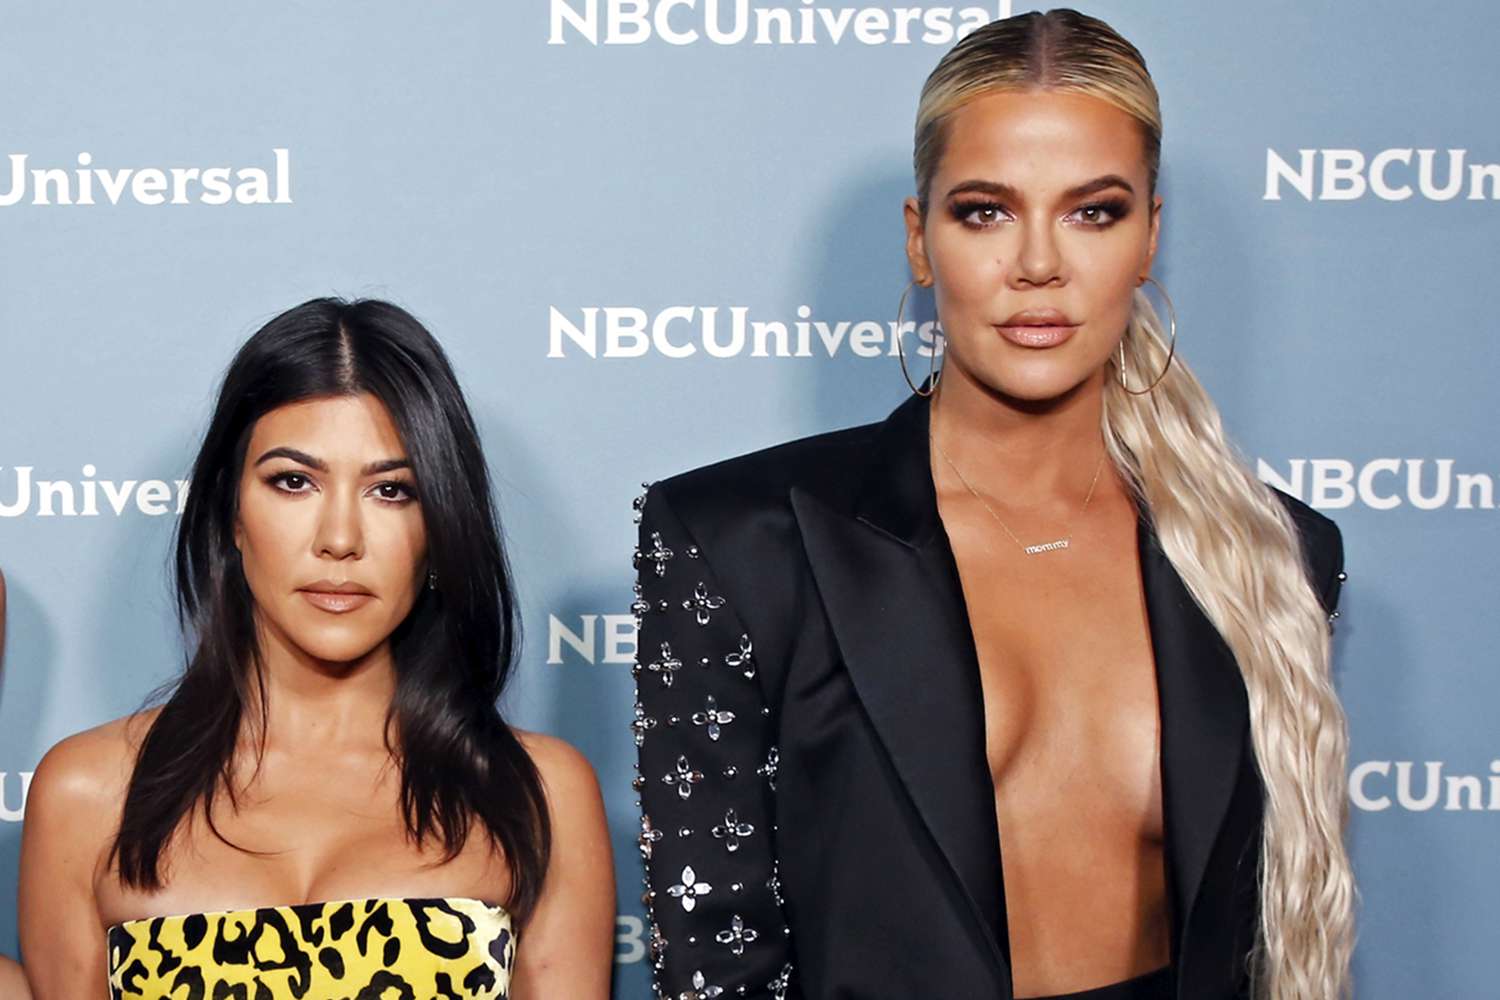 Khloé Kardashian Asks Tatum to Greet His ‘Auntie Kourt' — But She’s Insulted When He Thinks She’s Kris Jenner